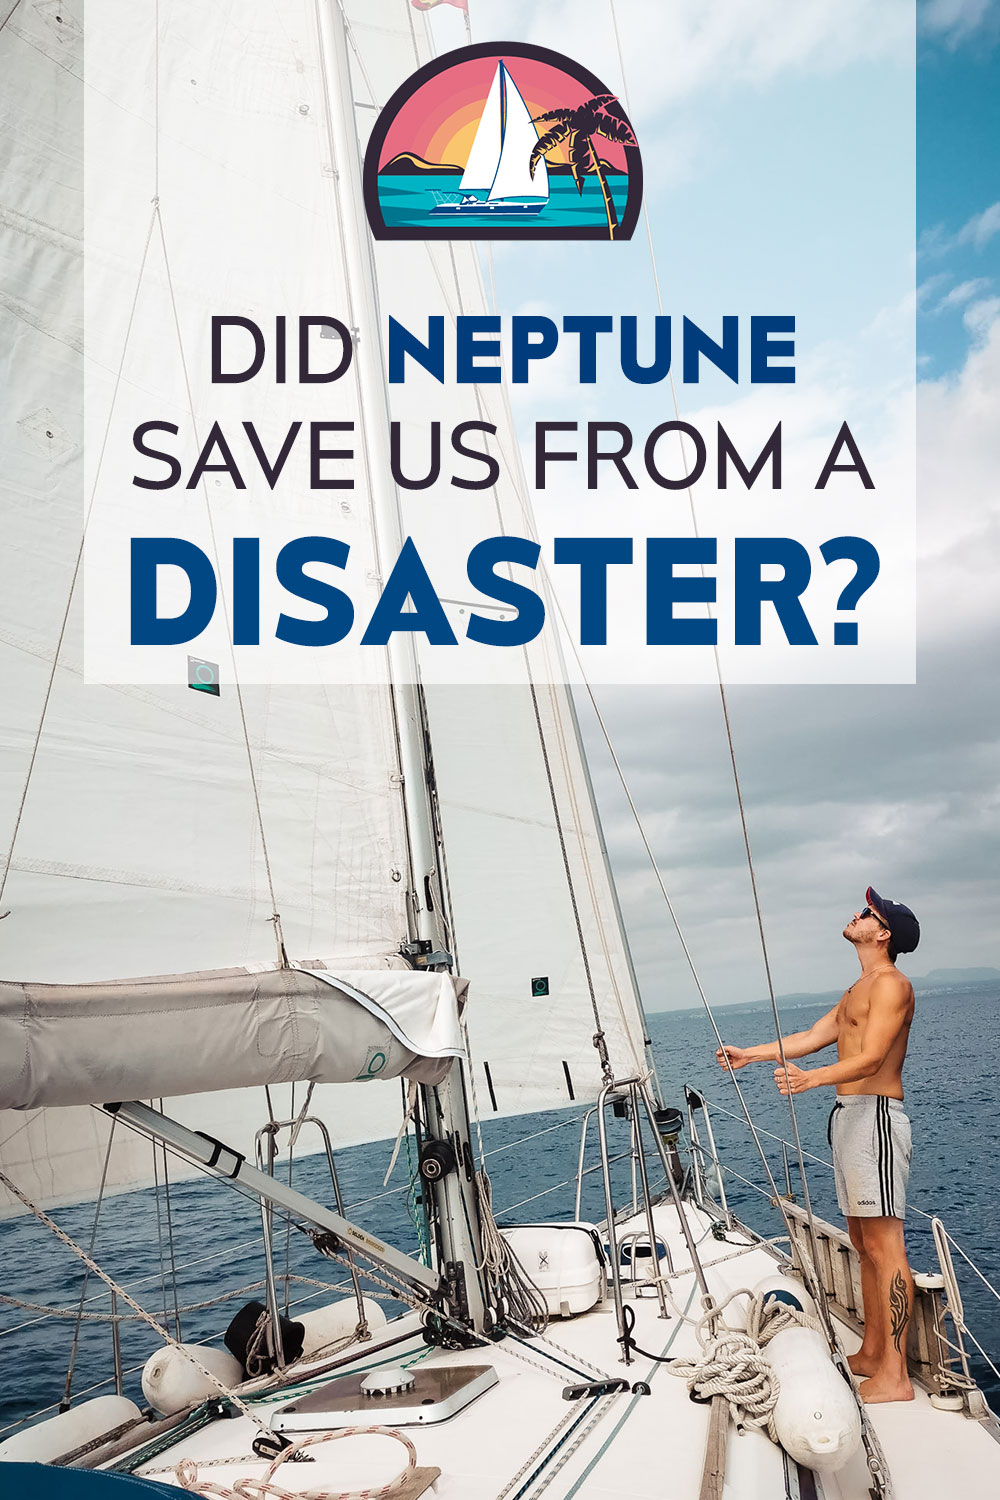 Did Neptune save us from a disaster?